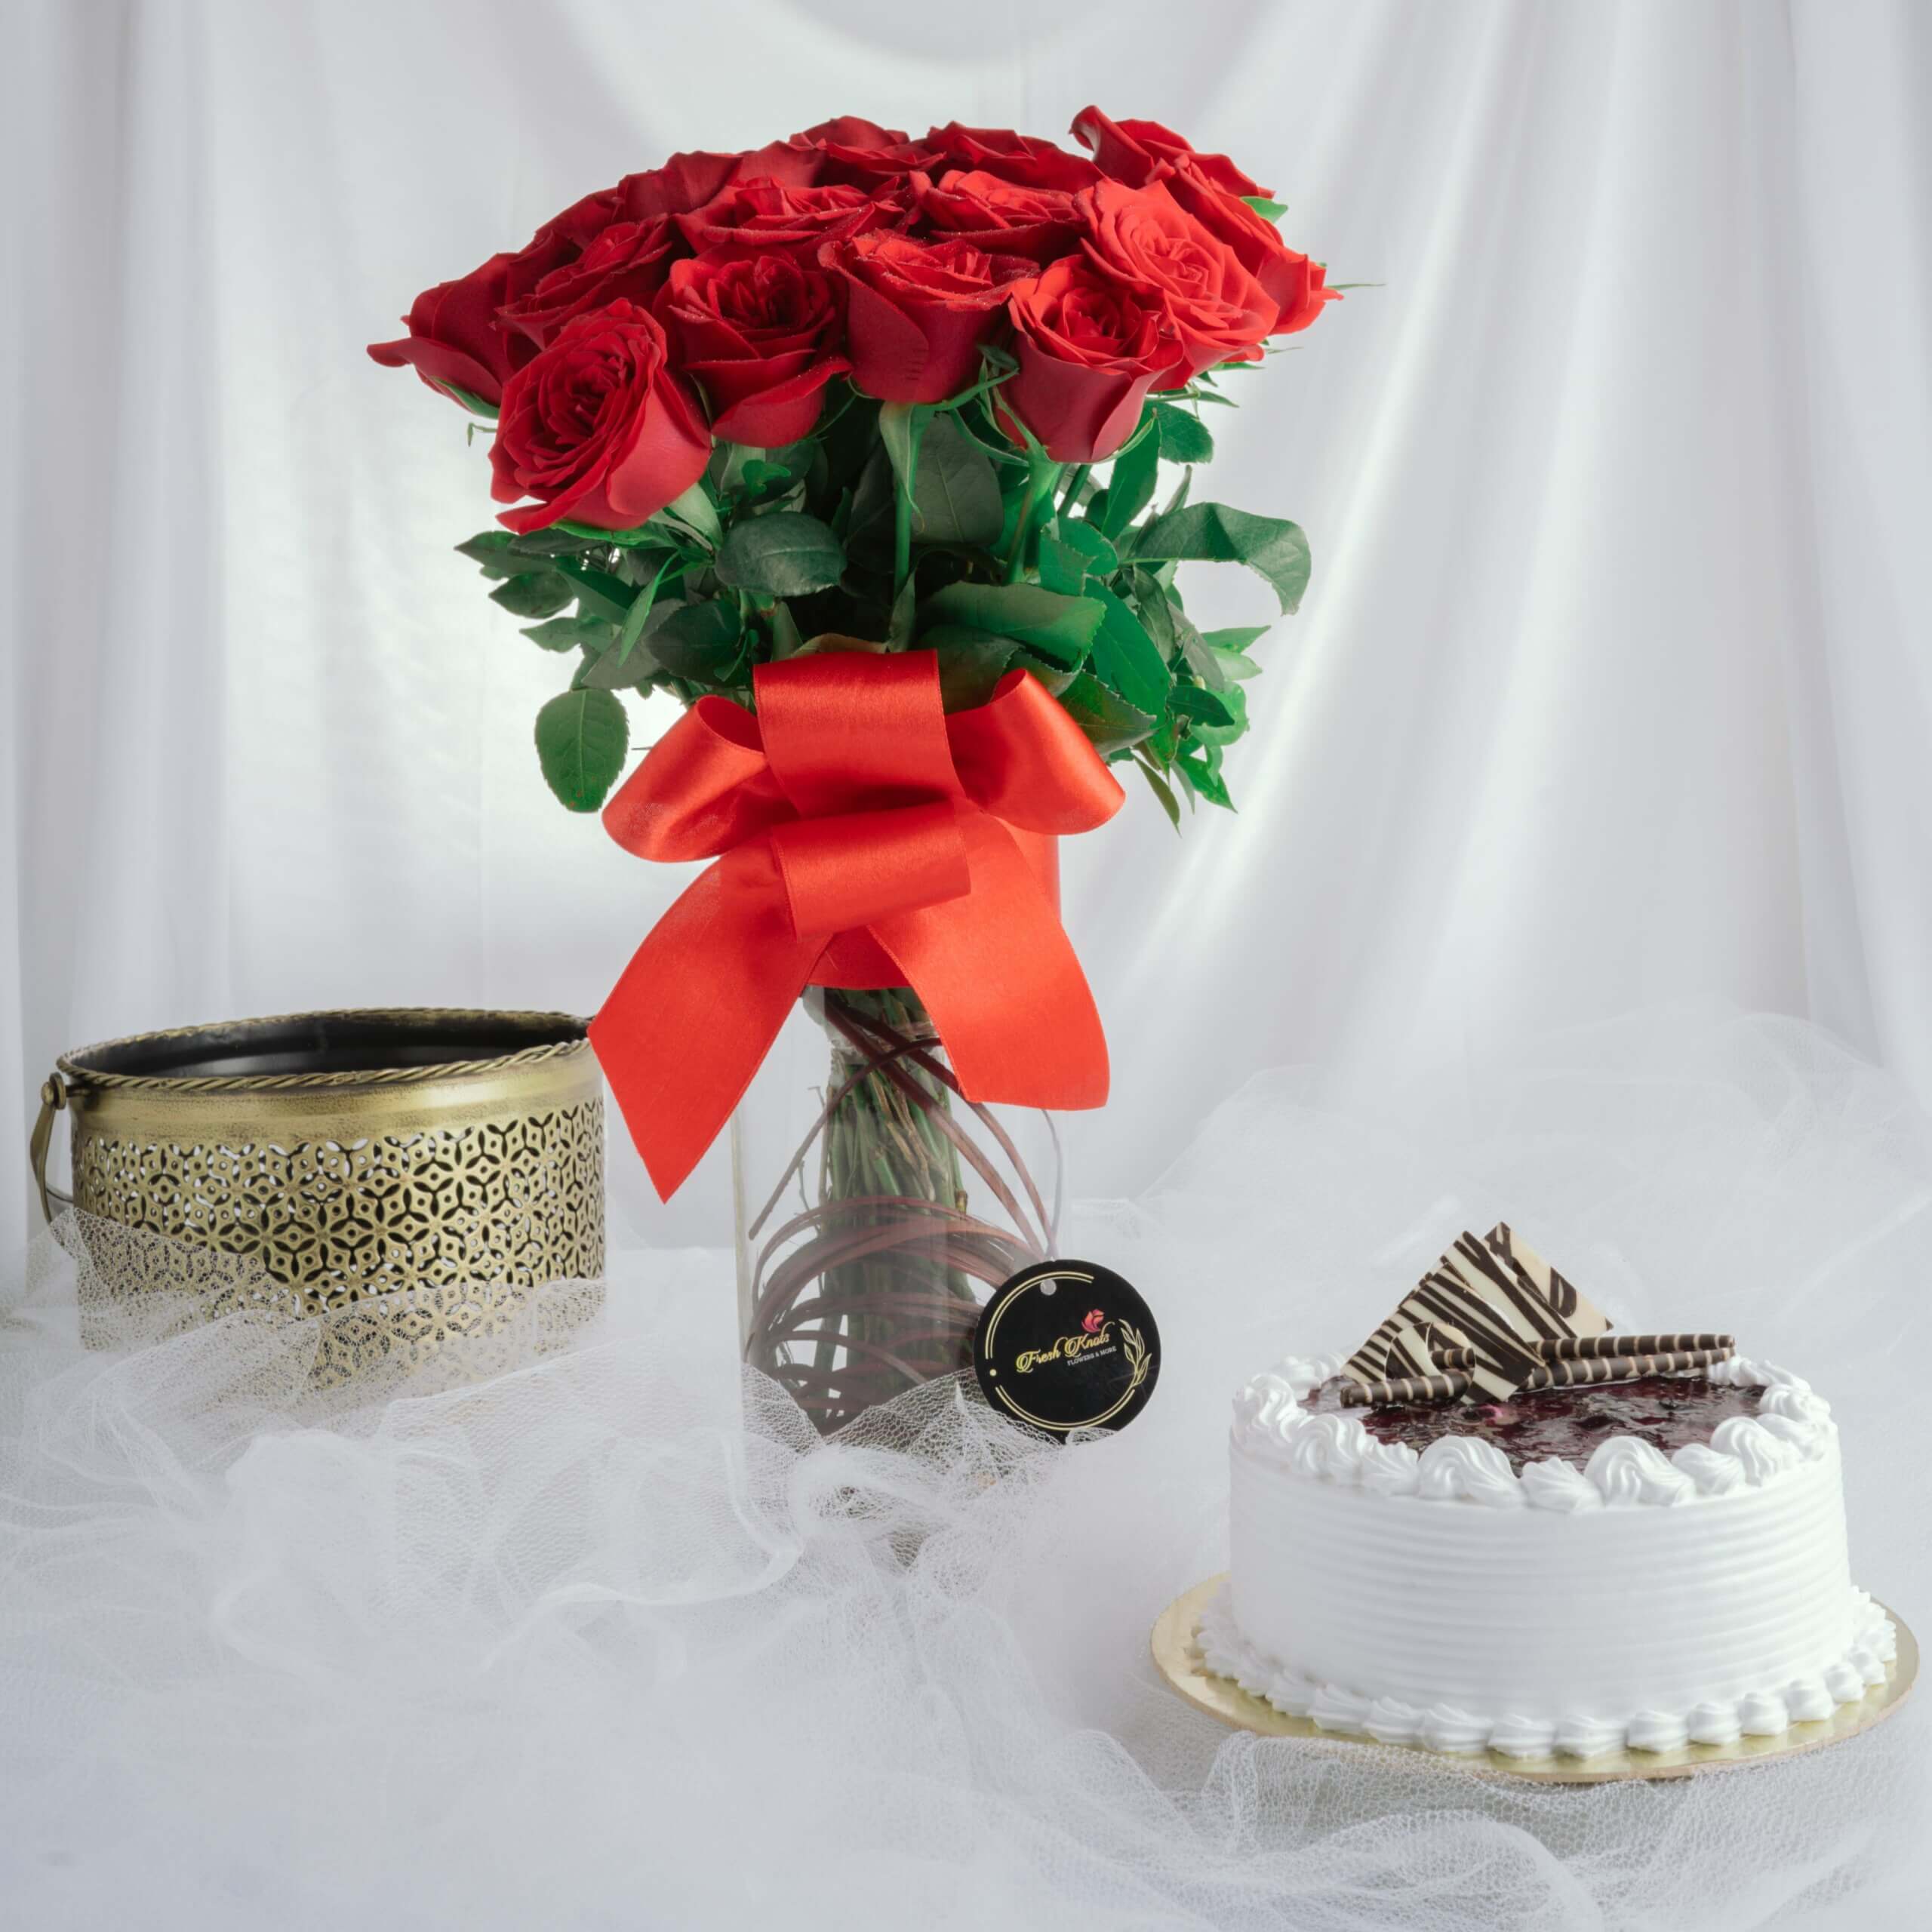 Combo-Roses-In-A-Vase-Cake - gifts with flowers